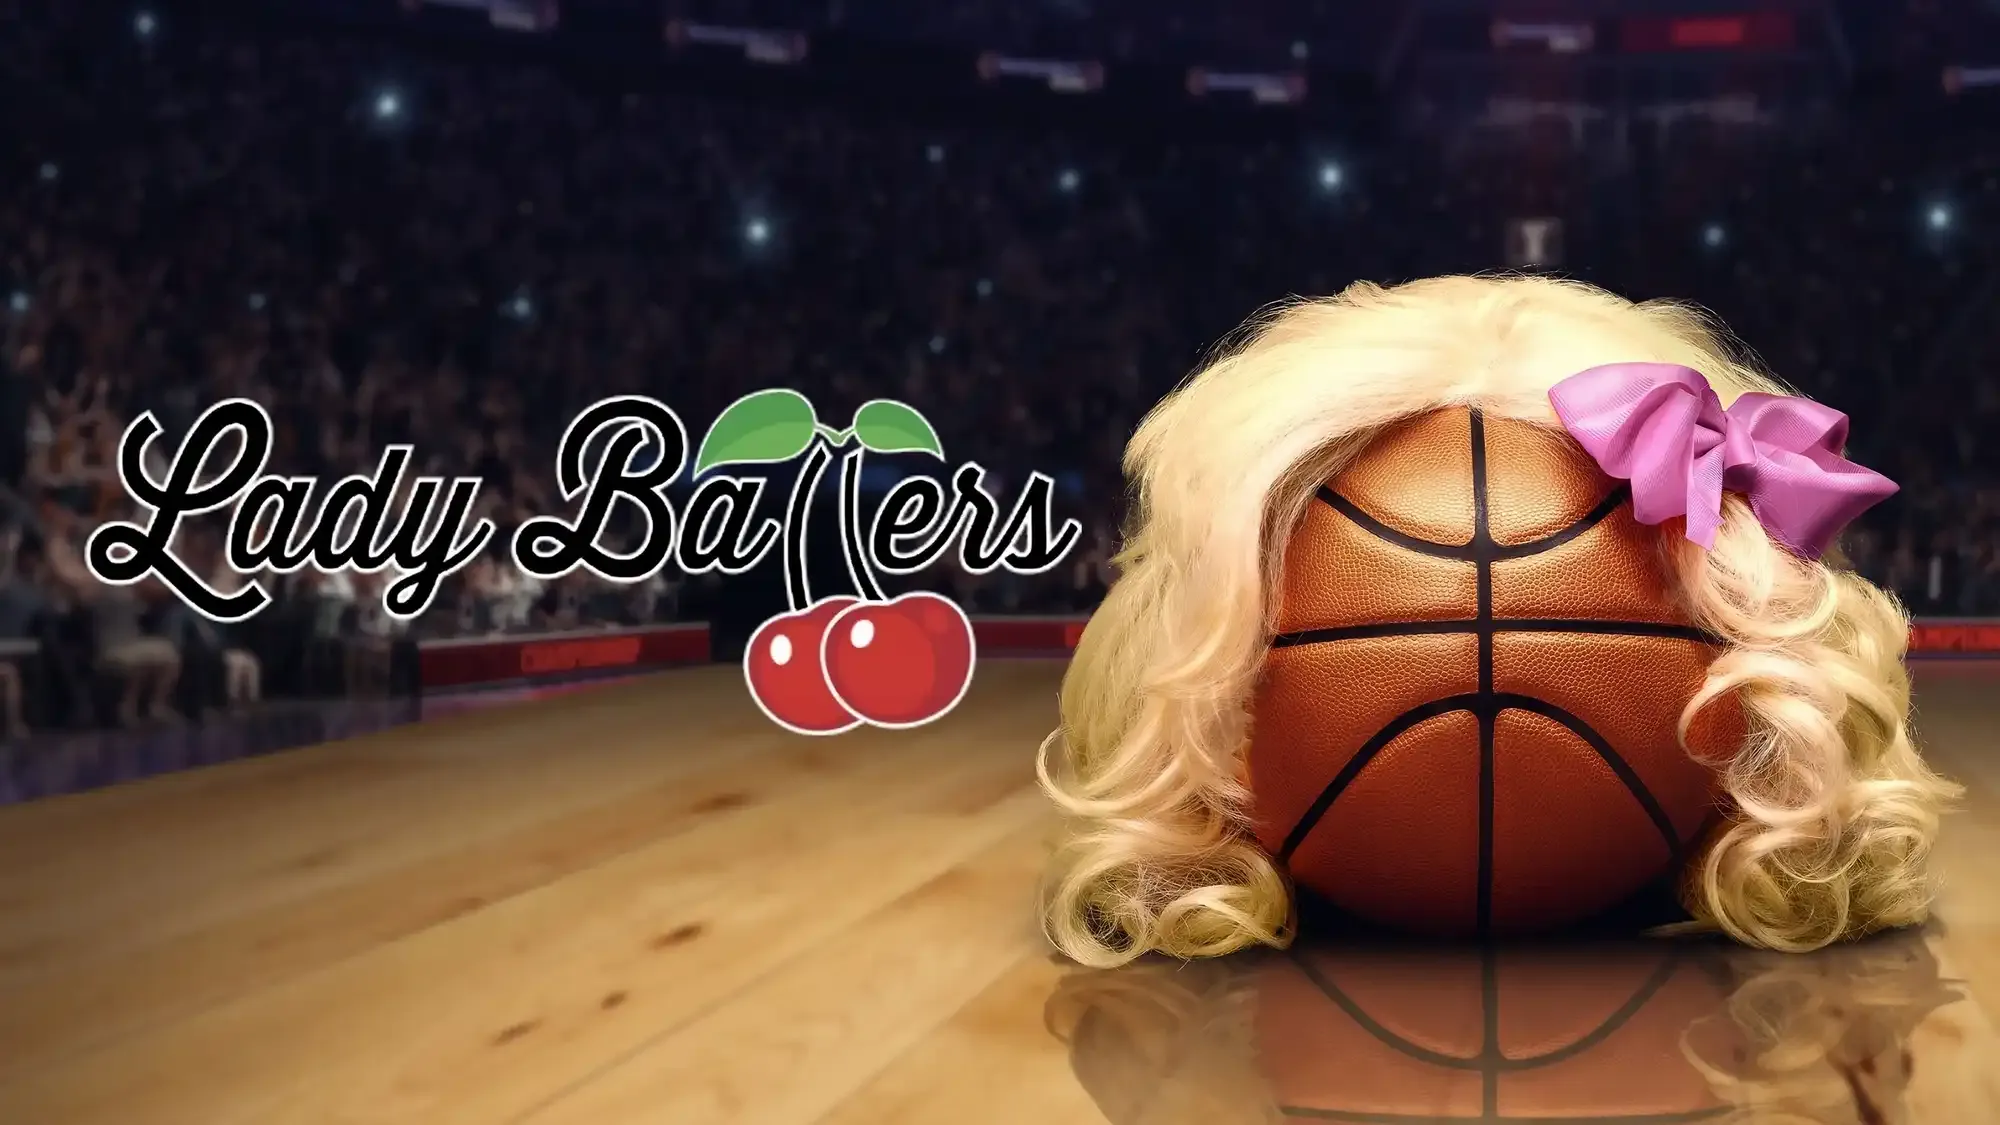 Lady Ballers movie review